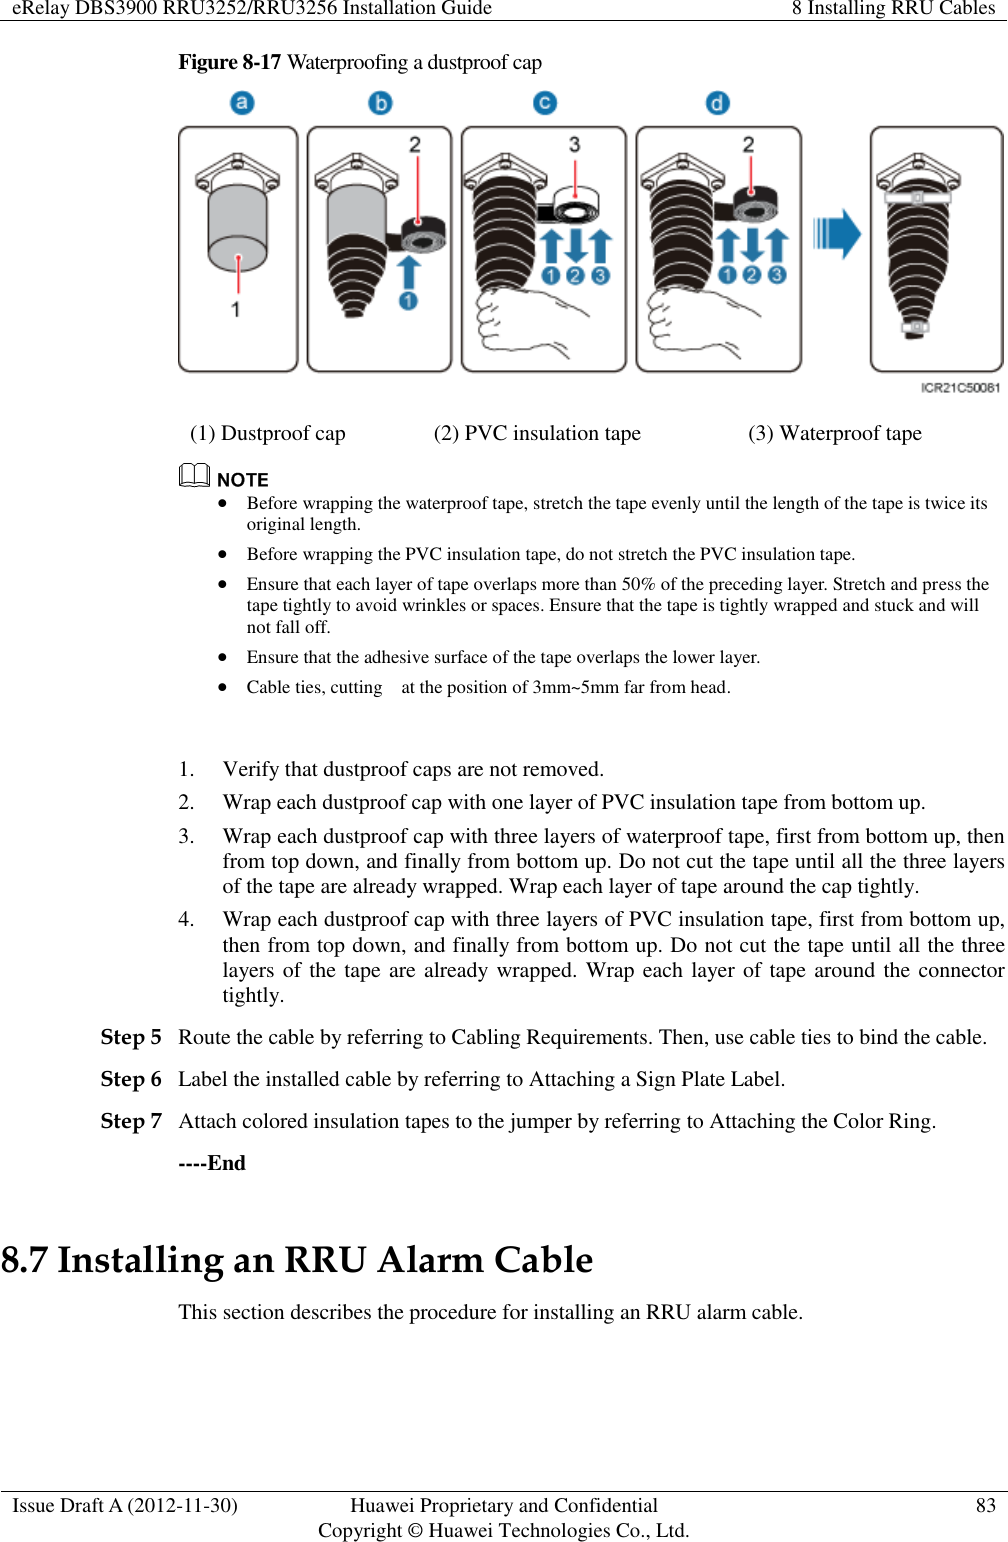 eRelay DBS3900 RRU3252/RRU3256 Installation Guide 8 Installing RRU Cables  Issue Draft A (2012-11-30) Huawei Proprietary and Confidential                                     Copyright © Huawei Technologies Co., Ltd. 83  Figure 8-17 Waterproofing a dustproof cap  (1) Dustproof cap (2) PVC insulation tape (3) Waterproof tape   Before wrapping the waterproof tape, stretch the tape evenly until the length of the tape is twice its original length.    Before wrapping the PVC insulation tape, do not stretch the PVC insulation tape.  Ensure that each layer of tape overlaps more than 50% of the preceding layer. Stretch and press the tape tightly to avoid wrinkles or spaces. Ensure that the tape is tightly wrapped and stuck and will not fall off.    Ensure that the adhesive surface of the tape overlaps the lower layer.  Cable ties, cutting    at the position of 3mm~5mm far from head.  1. Verify that dustproof caps are not removed. 2. Wrap each dustproof cap with one layer of PVC insulation tape from bottom up. 3. Wrap each dustproof cap with three layers of waterproof tape, first from bottom up, then from top down, and finally from bottom up. Do not cut the tape until all the three layers of the tape are already wrapped. Wrap each layer of tape around the cap tightly. 4. Wrap each dustproof cap with three layers of PVC insulation tape, first from bottom up, then from top down, and finally from bottom up. Do not cut the tape until all the three layers of  the tape are already wrapped. Wrap each layer of tape around the connector tightly. Step 5 Route the cable by referring to Cabling Requirements. Then, use cable ties to bind the cable. Step 6 Label the installed cable by referring to Attaching a Sign Plate Label. Step 7 Attach colored insulation tapes to the jumper by referring to Attaching the Color Ring.   ----End 8.7 Installing an RRU Alarm Cable This section describes the procedure for installing an RRU alarm cable. 